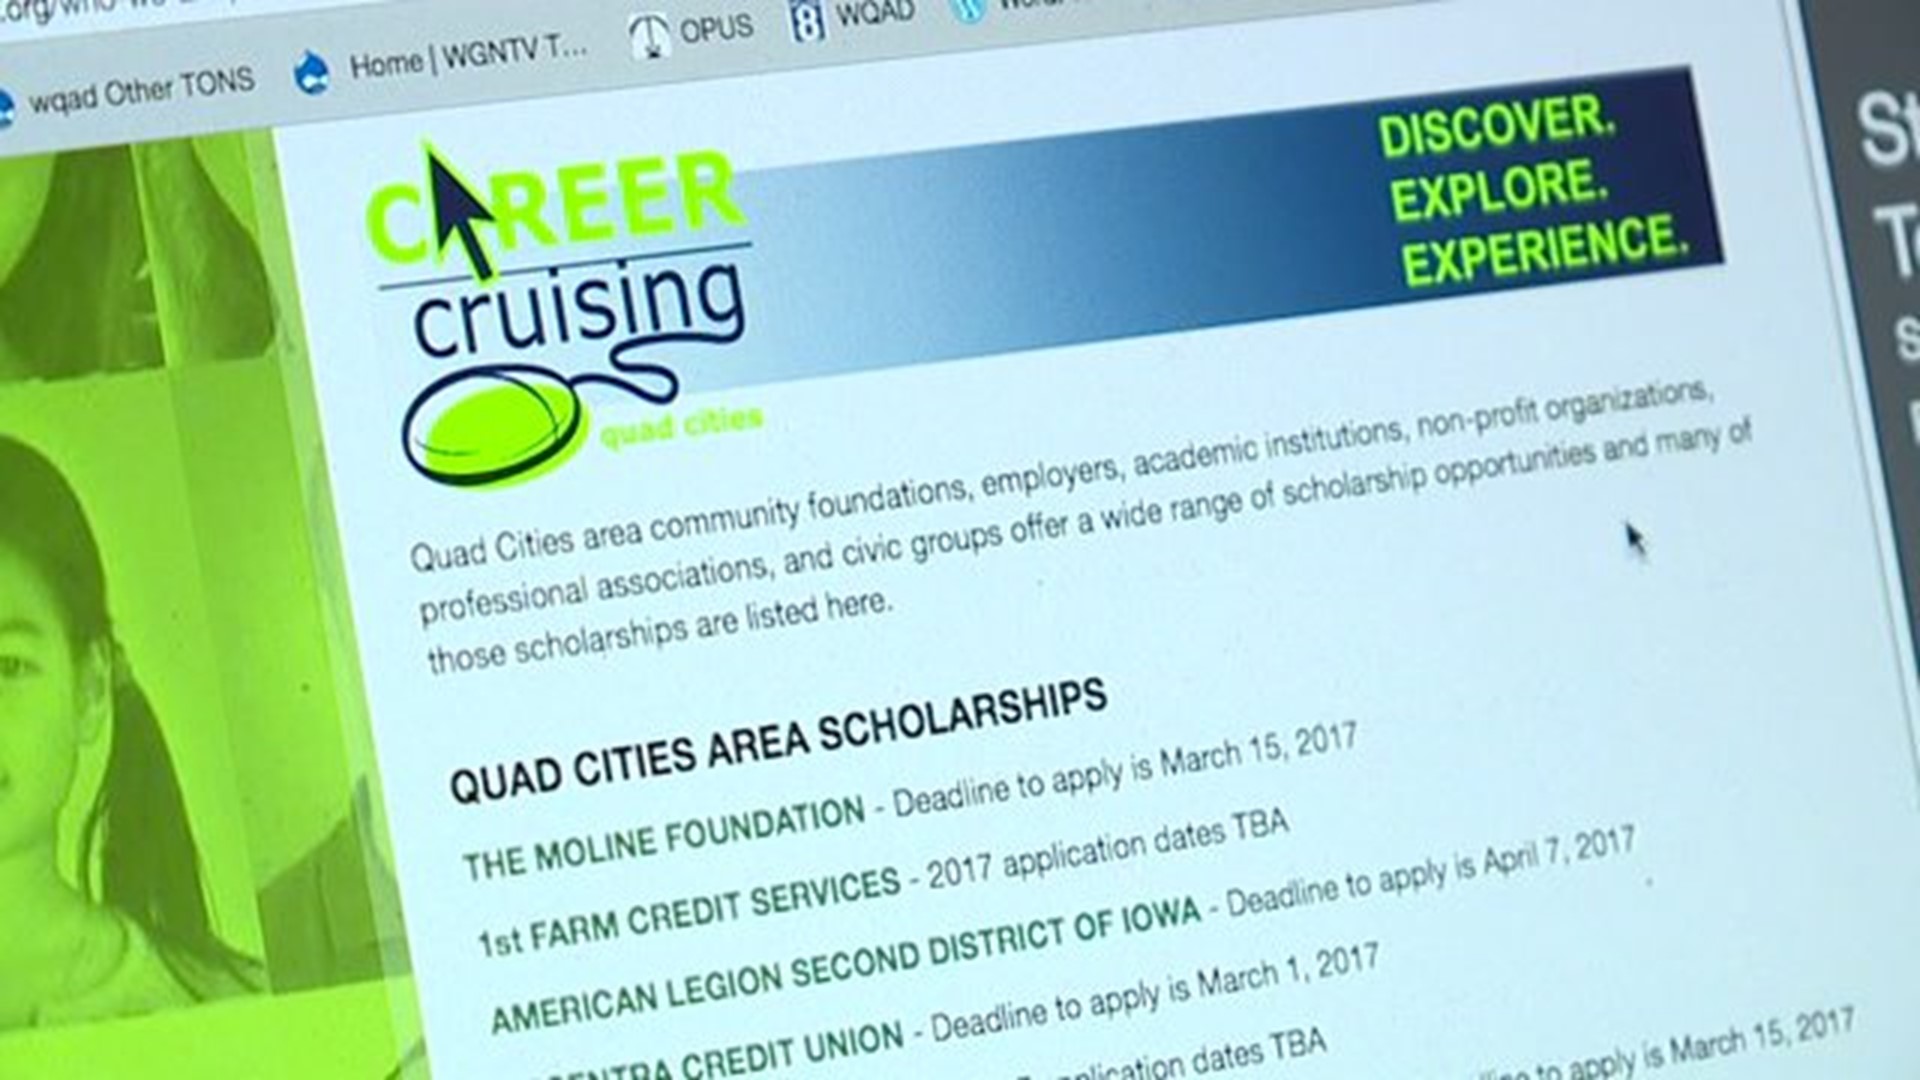 Scholarships available in the Quad Cities